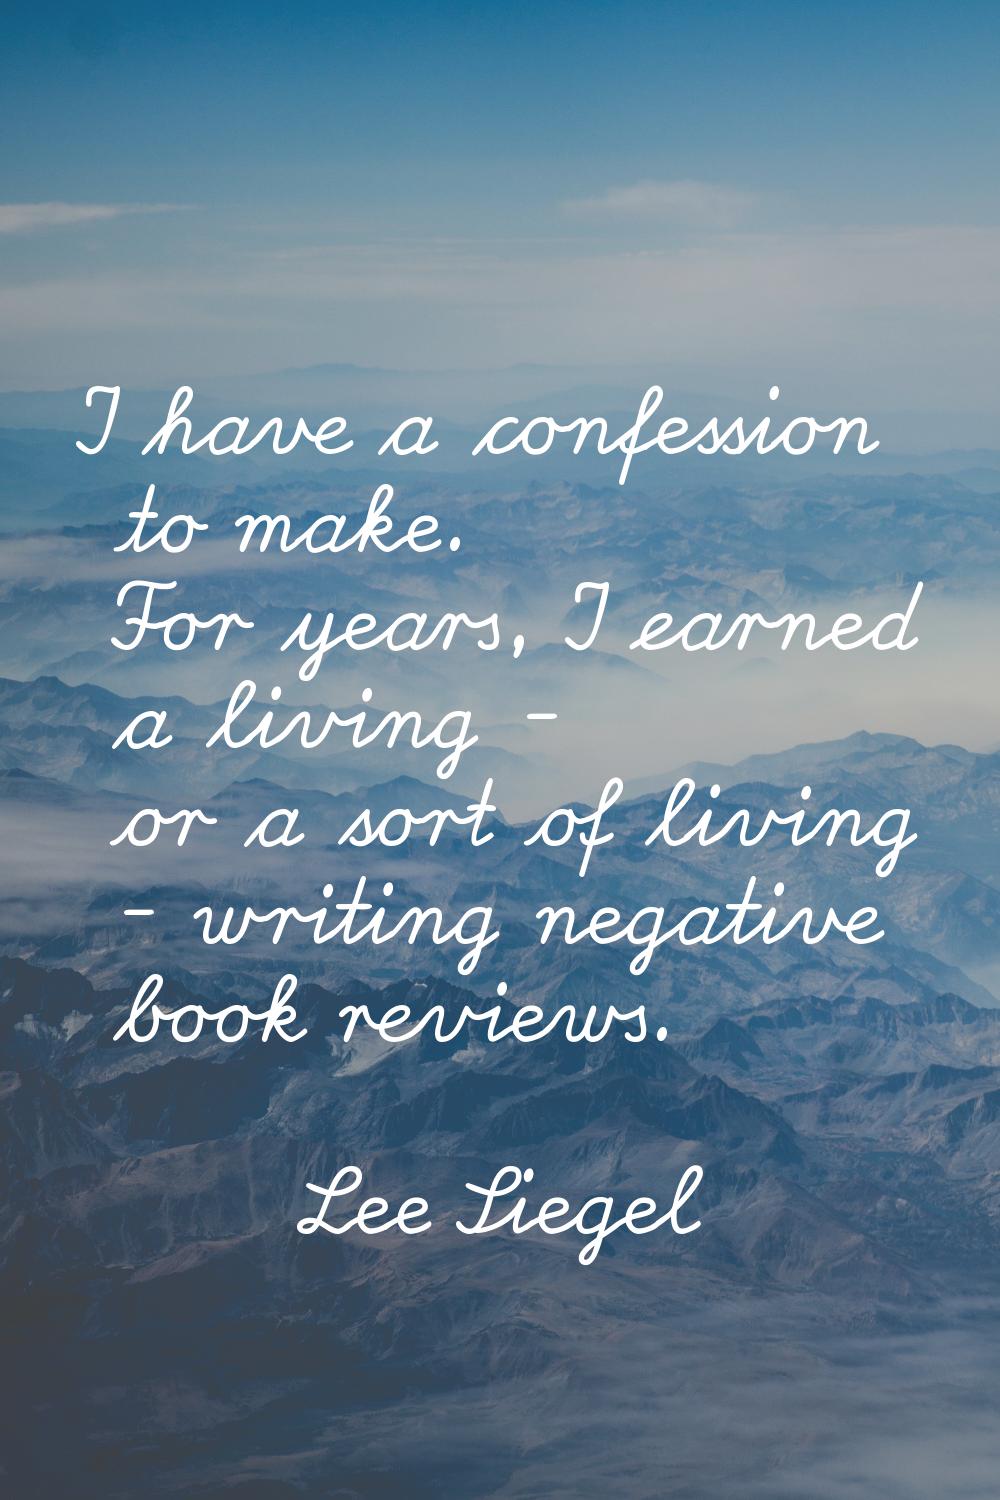 I have a confession to make. For years, I earned a living - or a sort of living - writing negative 